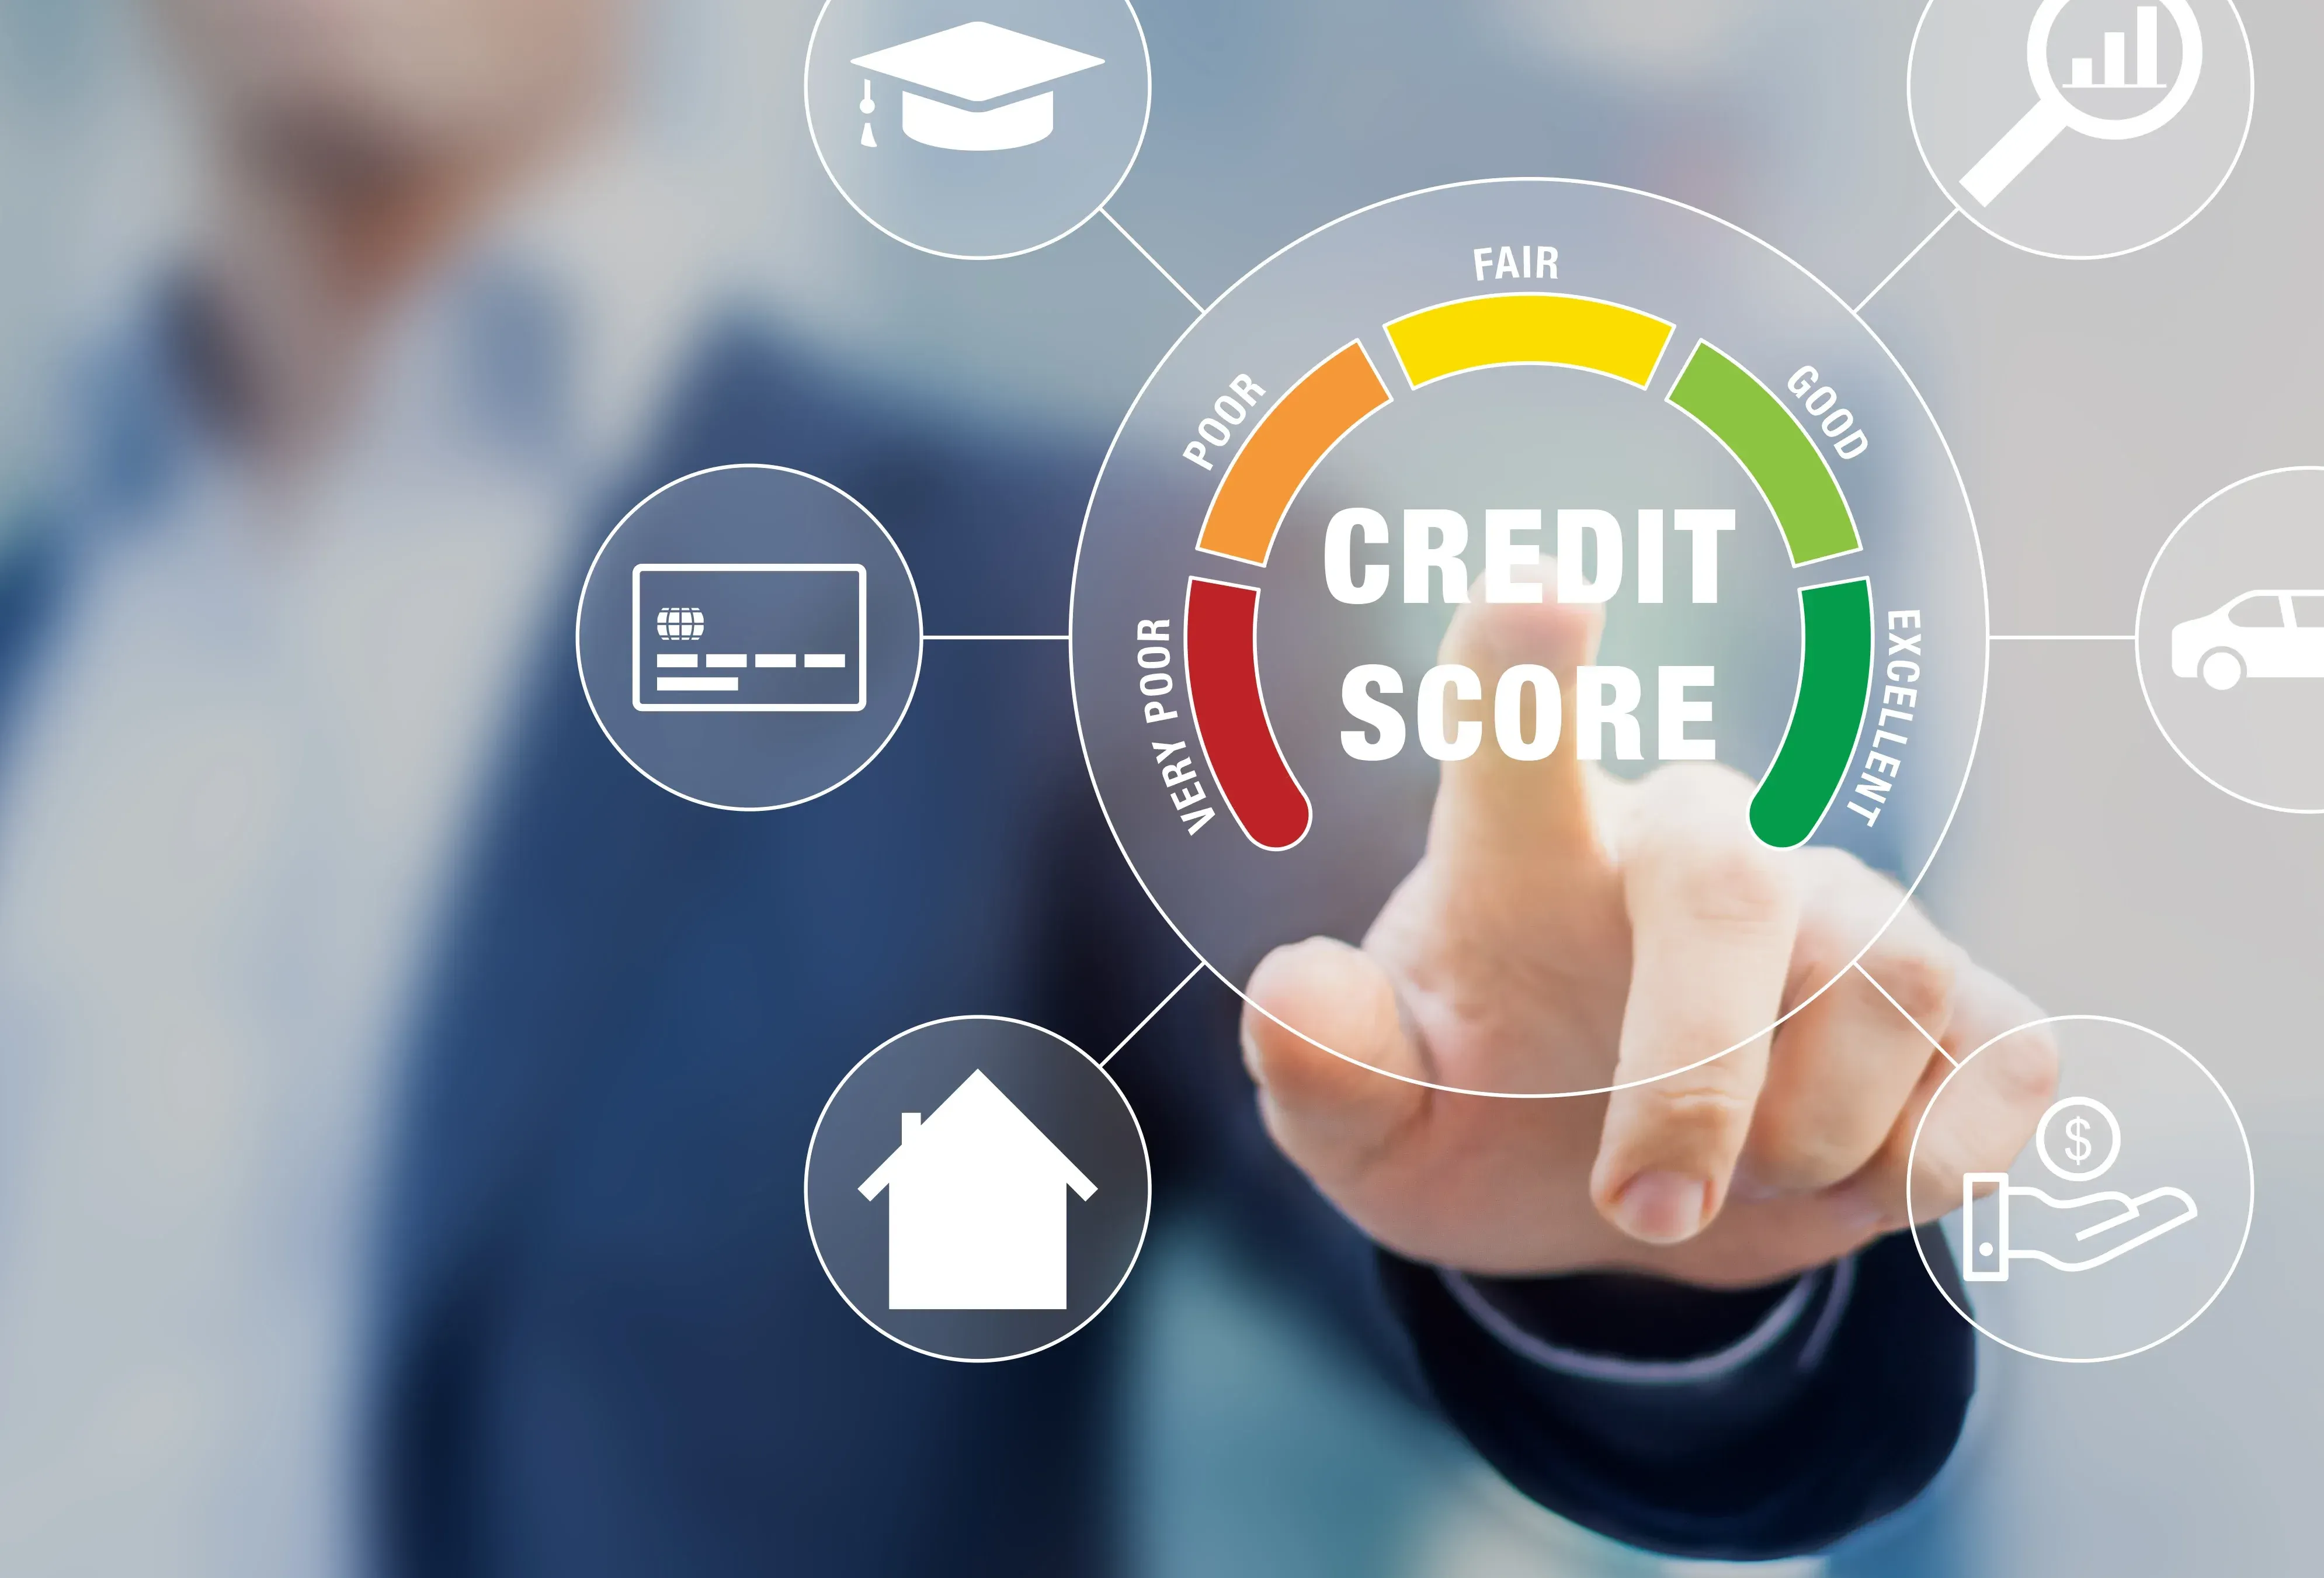 Check your credit score to assess your financial standing